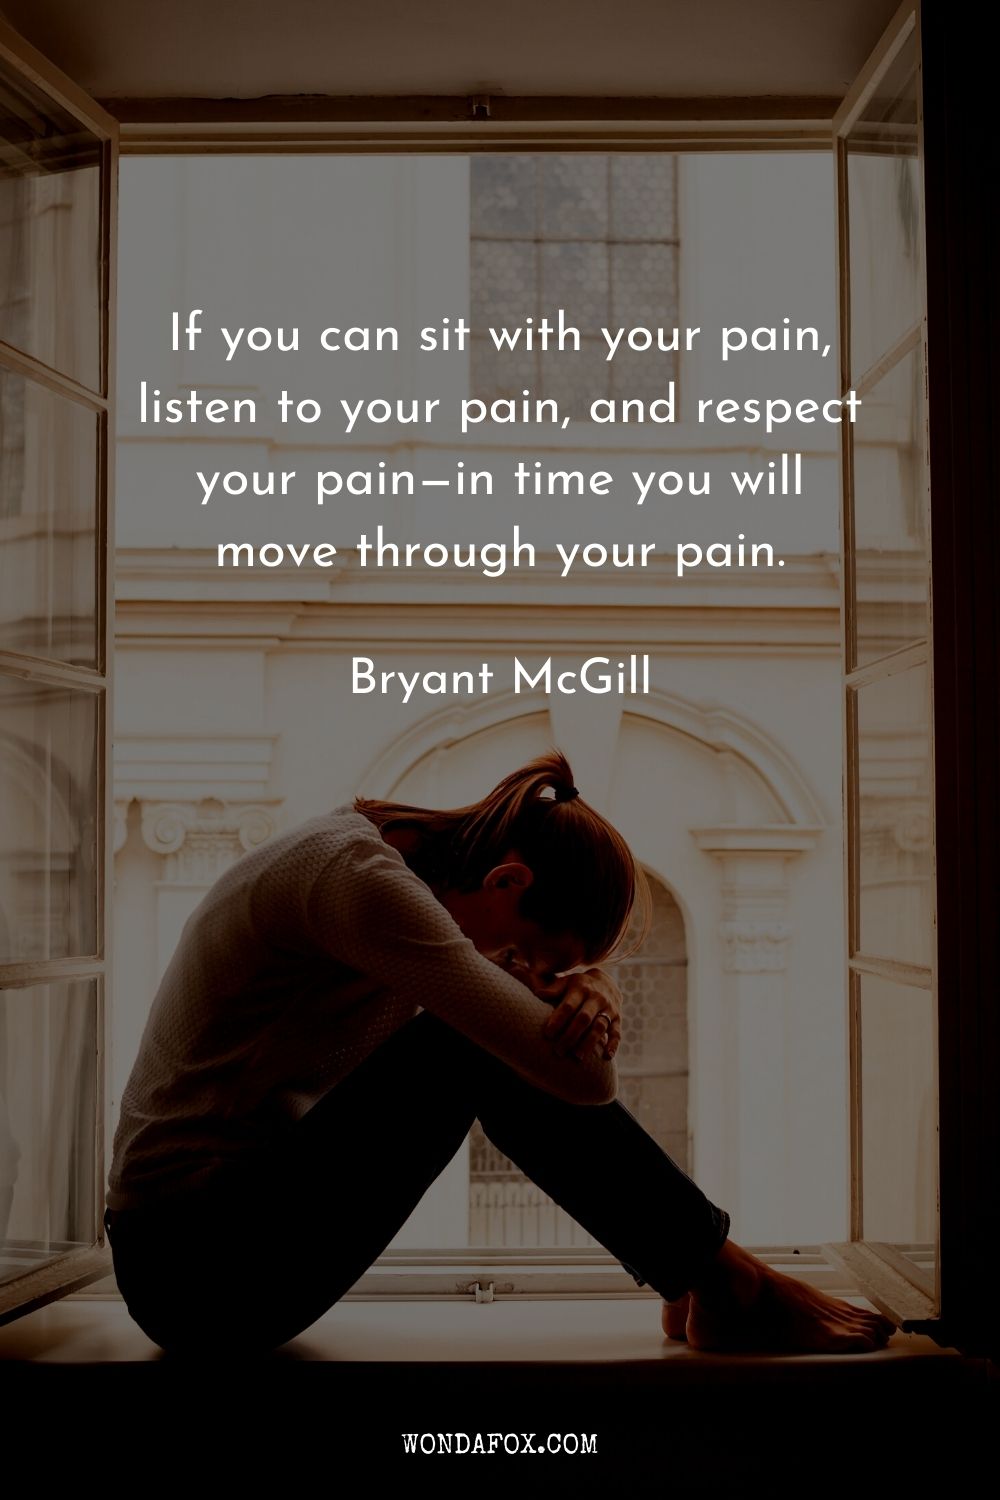 If you can sit with your pain, listen to your pain, and respect your pain—in time you will move through your pain.